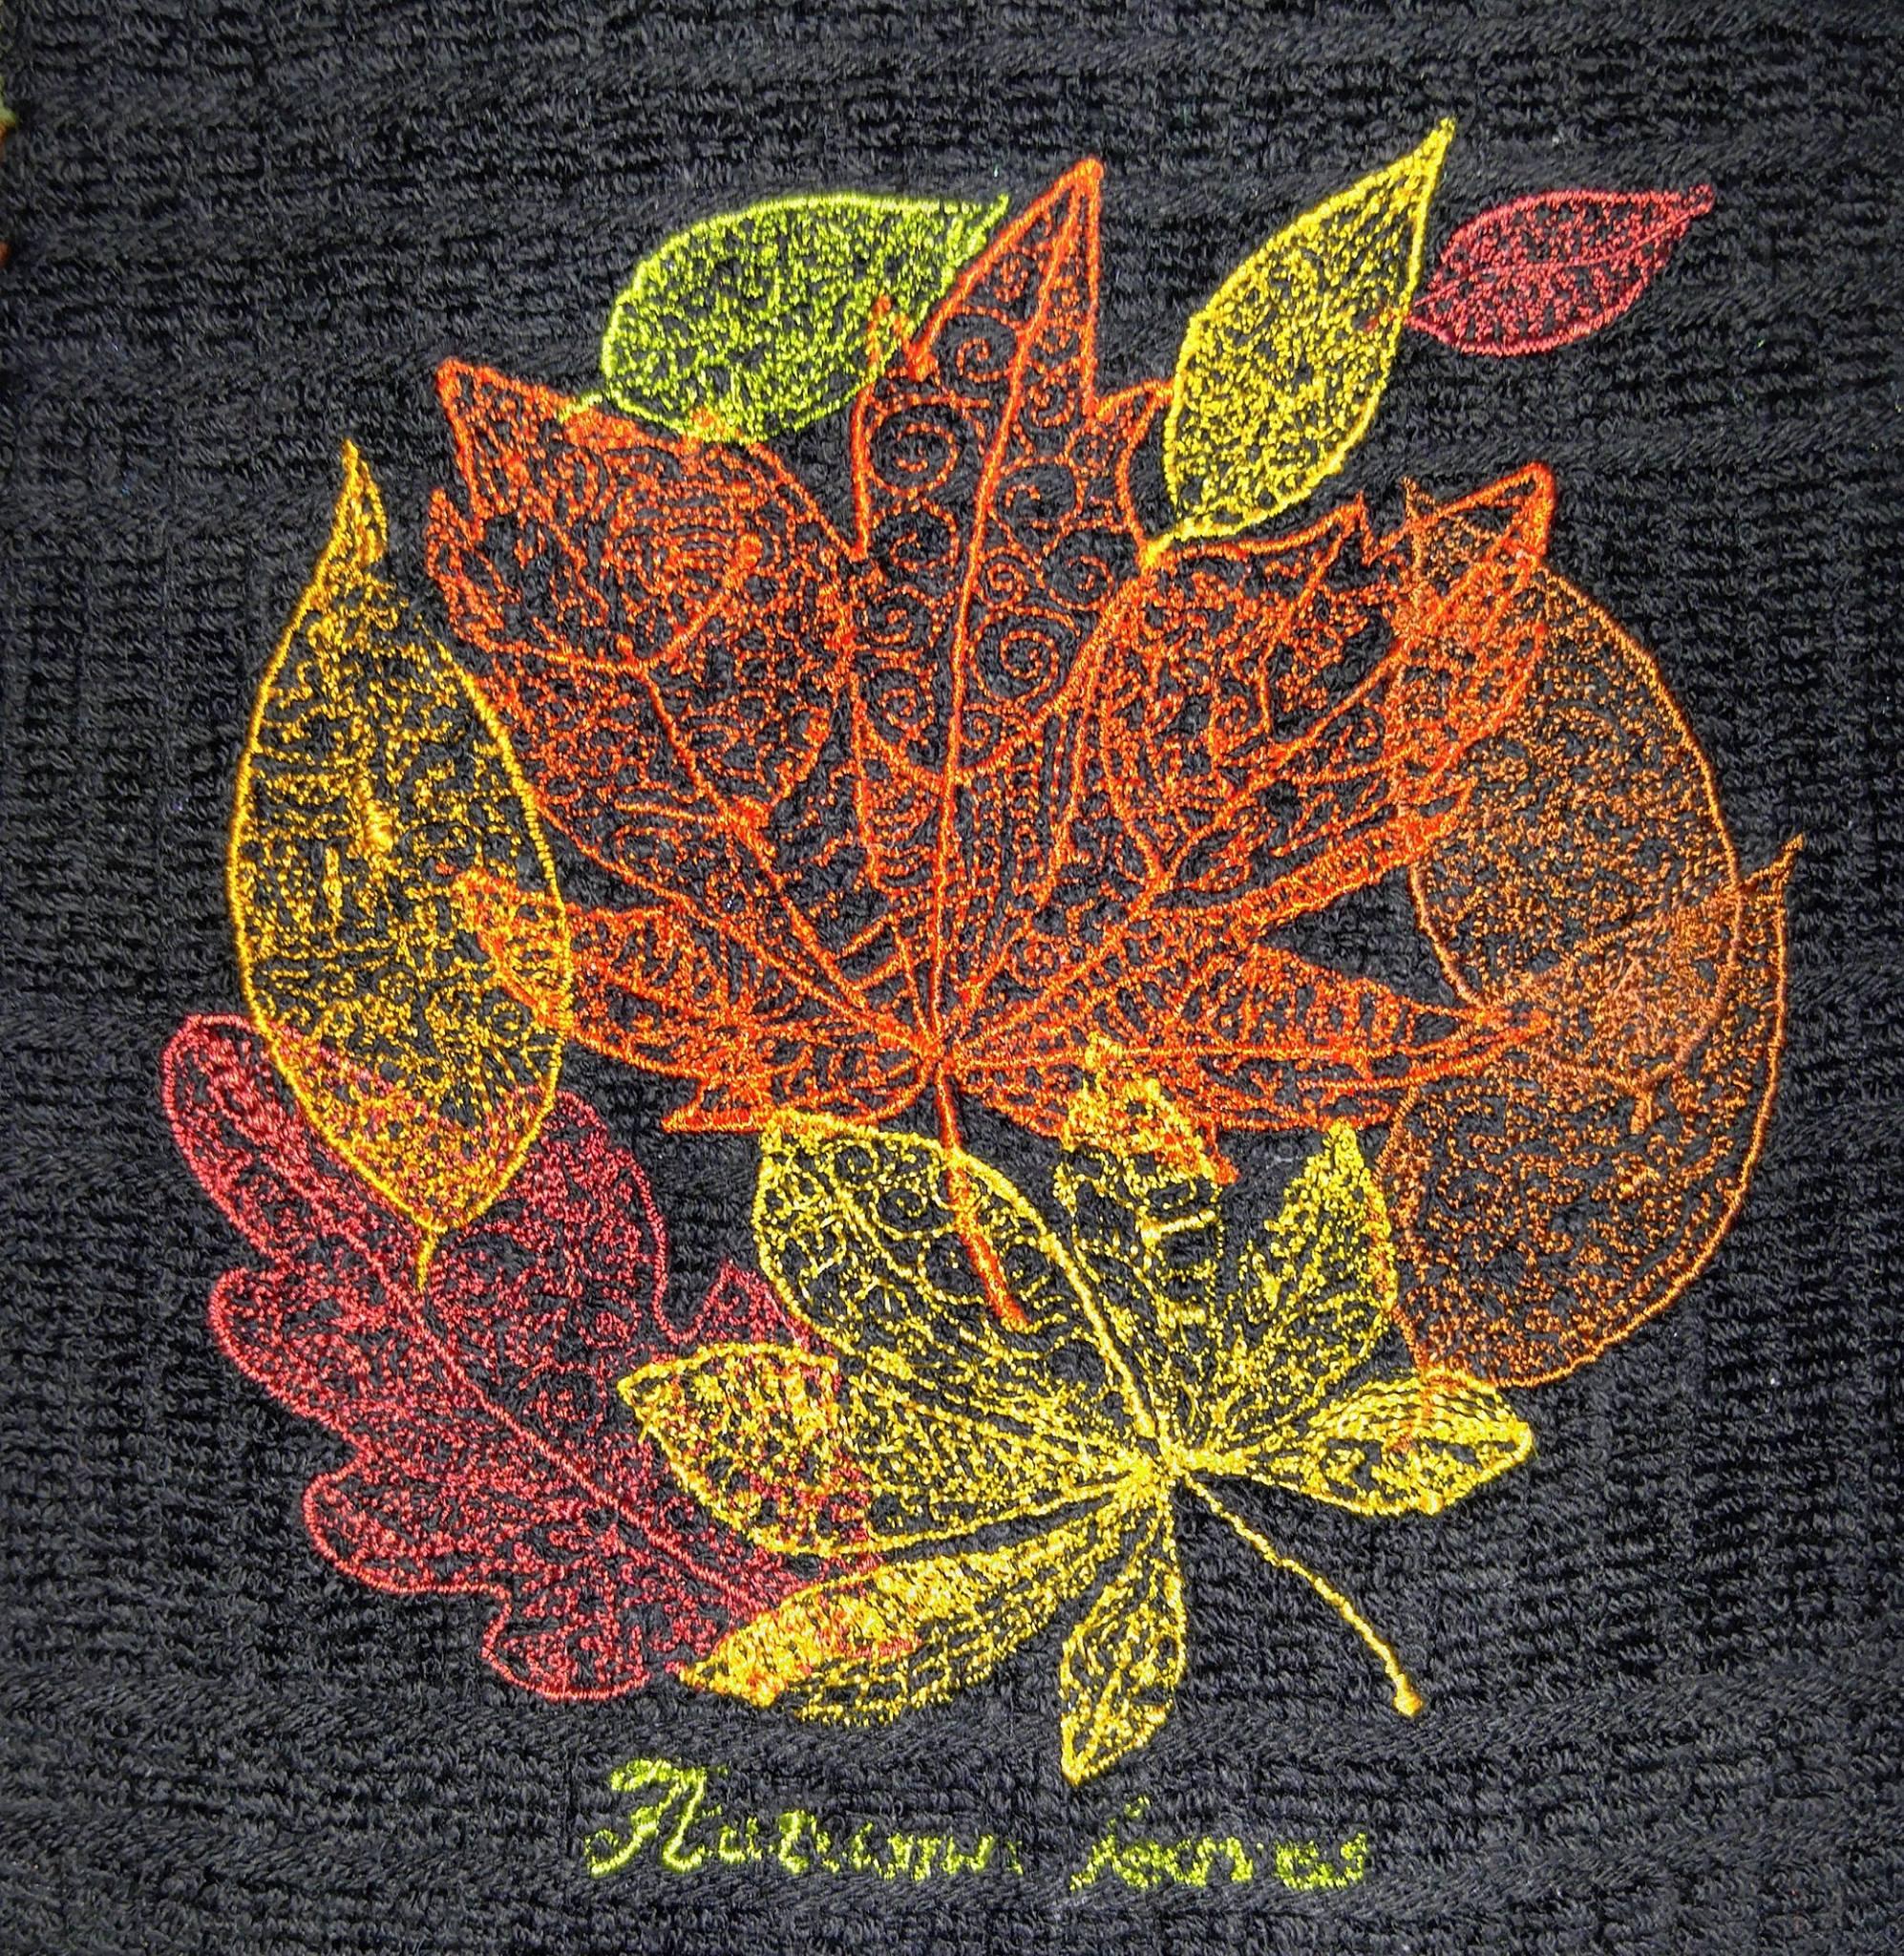 Autumn leaves embroidery design